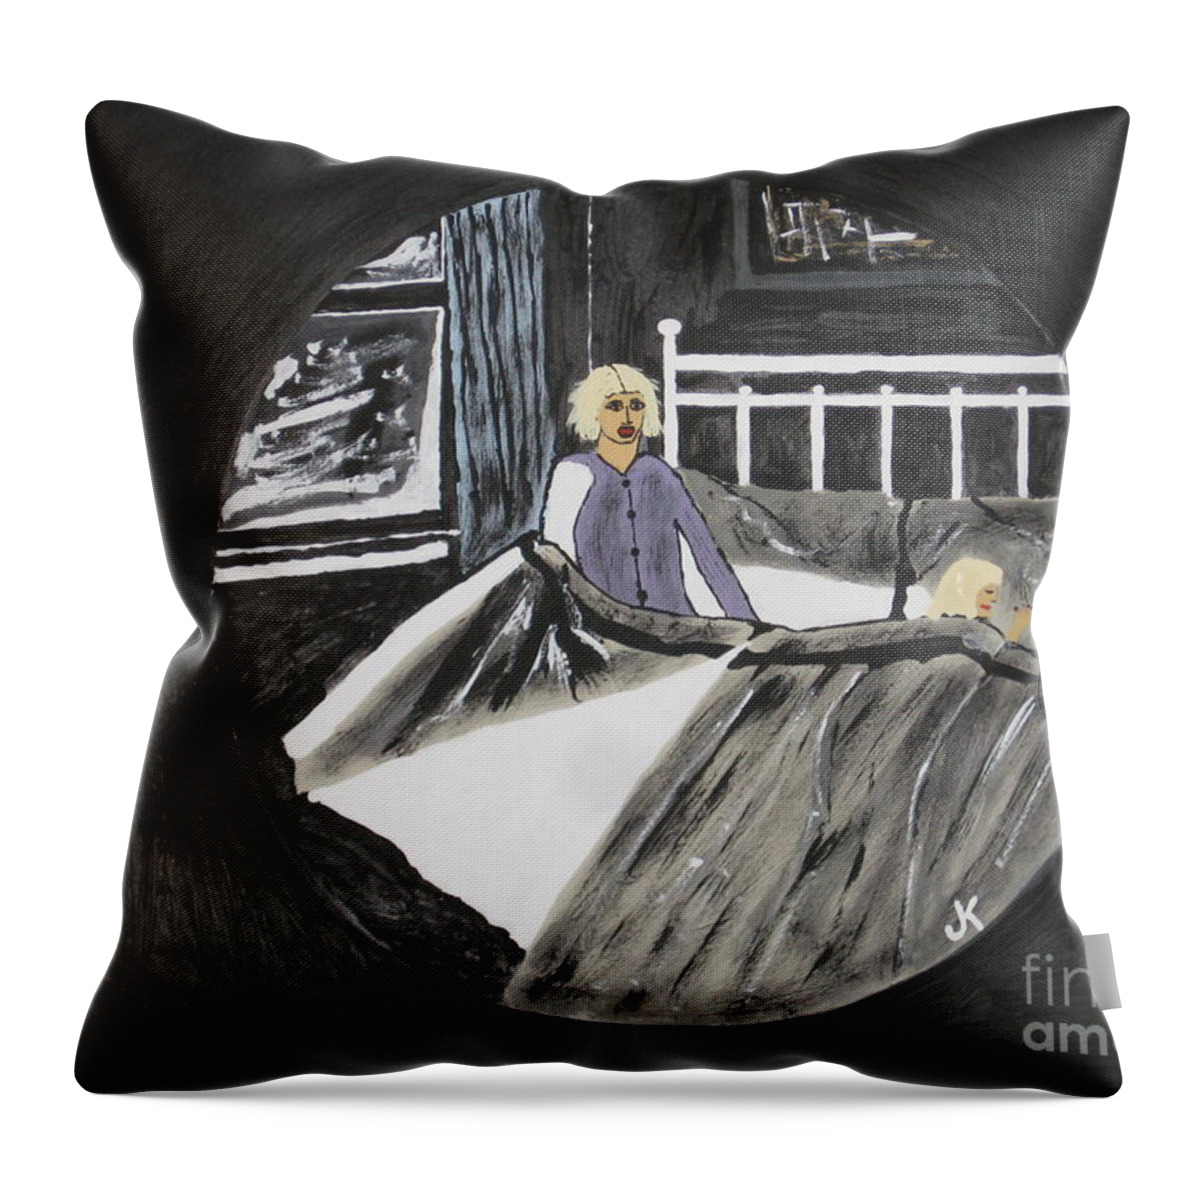  Throw Pillow featuring the painting Scary Dreams by Jeffrey Koss